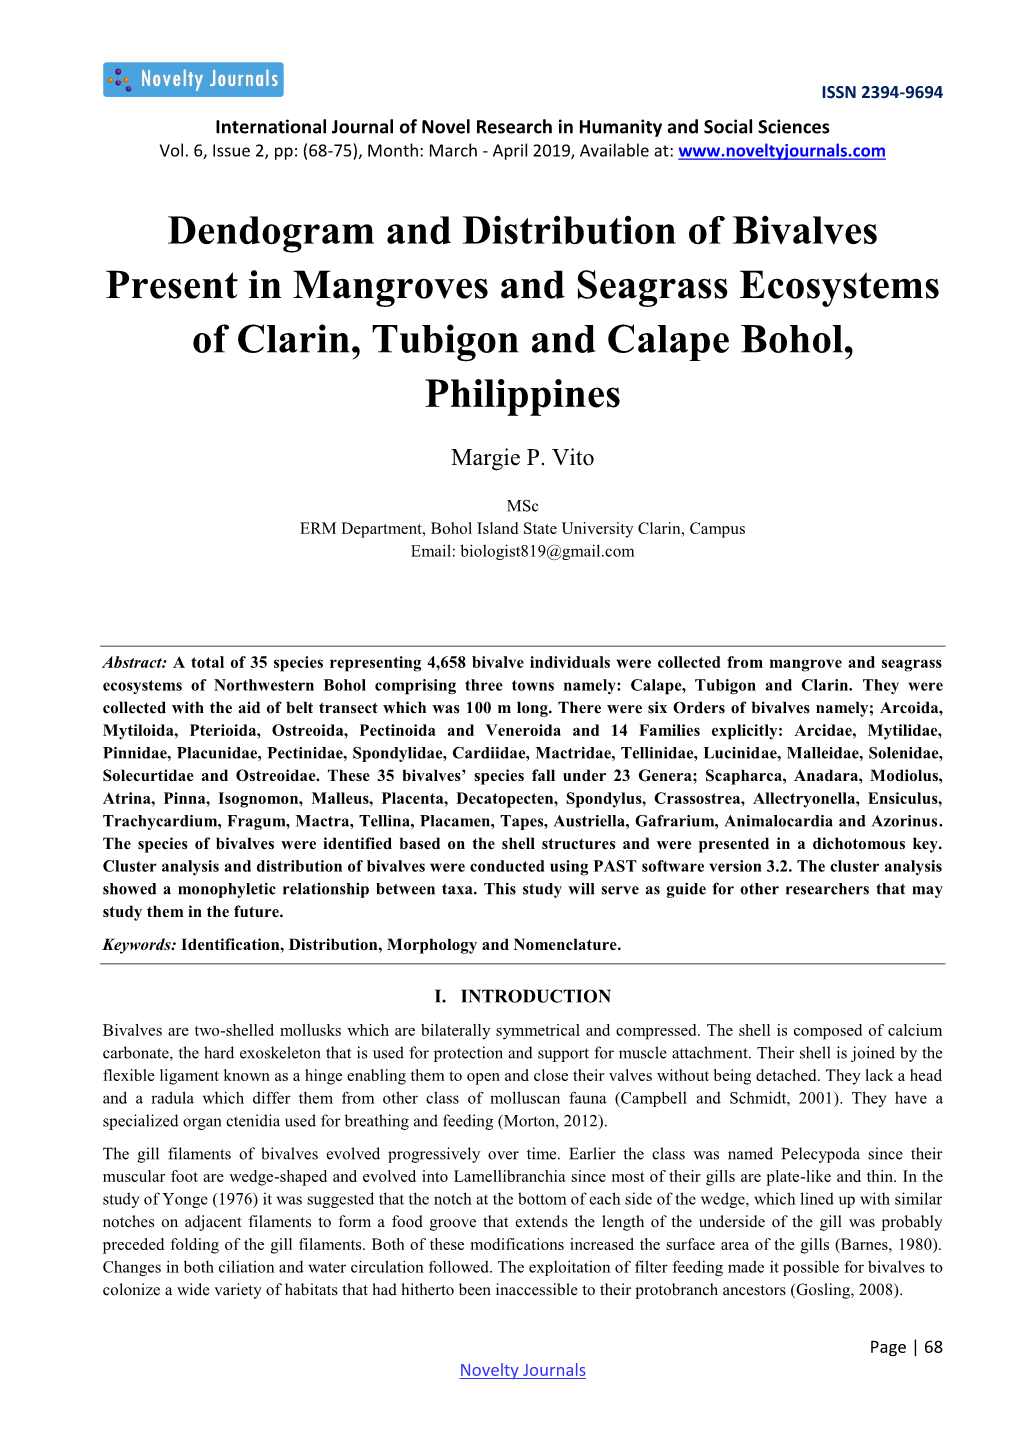 Dendogram and Distribution of Bivalves Present in Mangroves and Seagrass Ecosystems of Clarin, Tubigon and Calape Bohol, Philippines